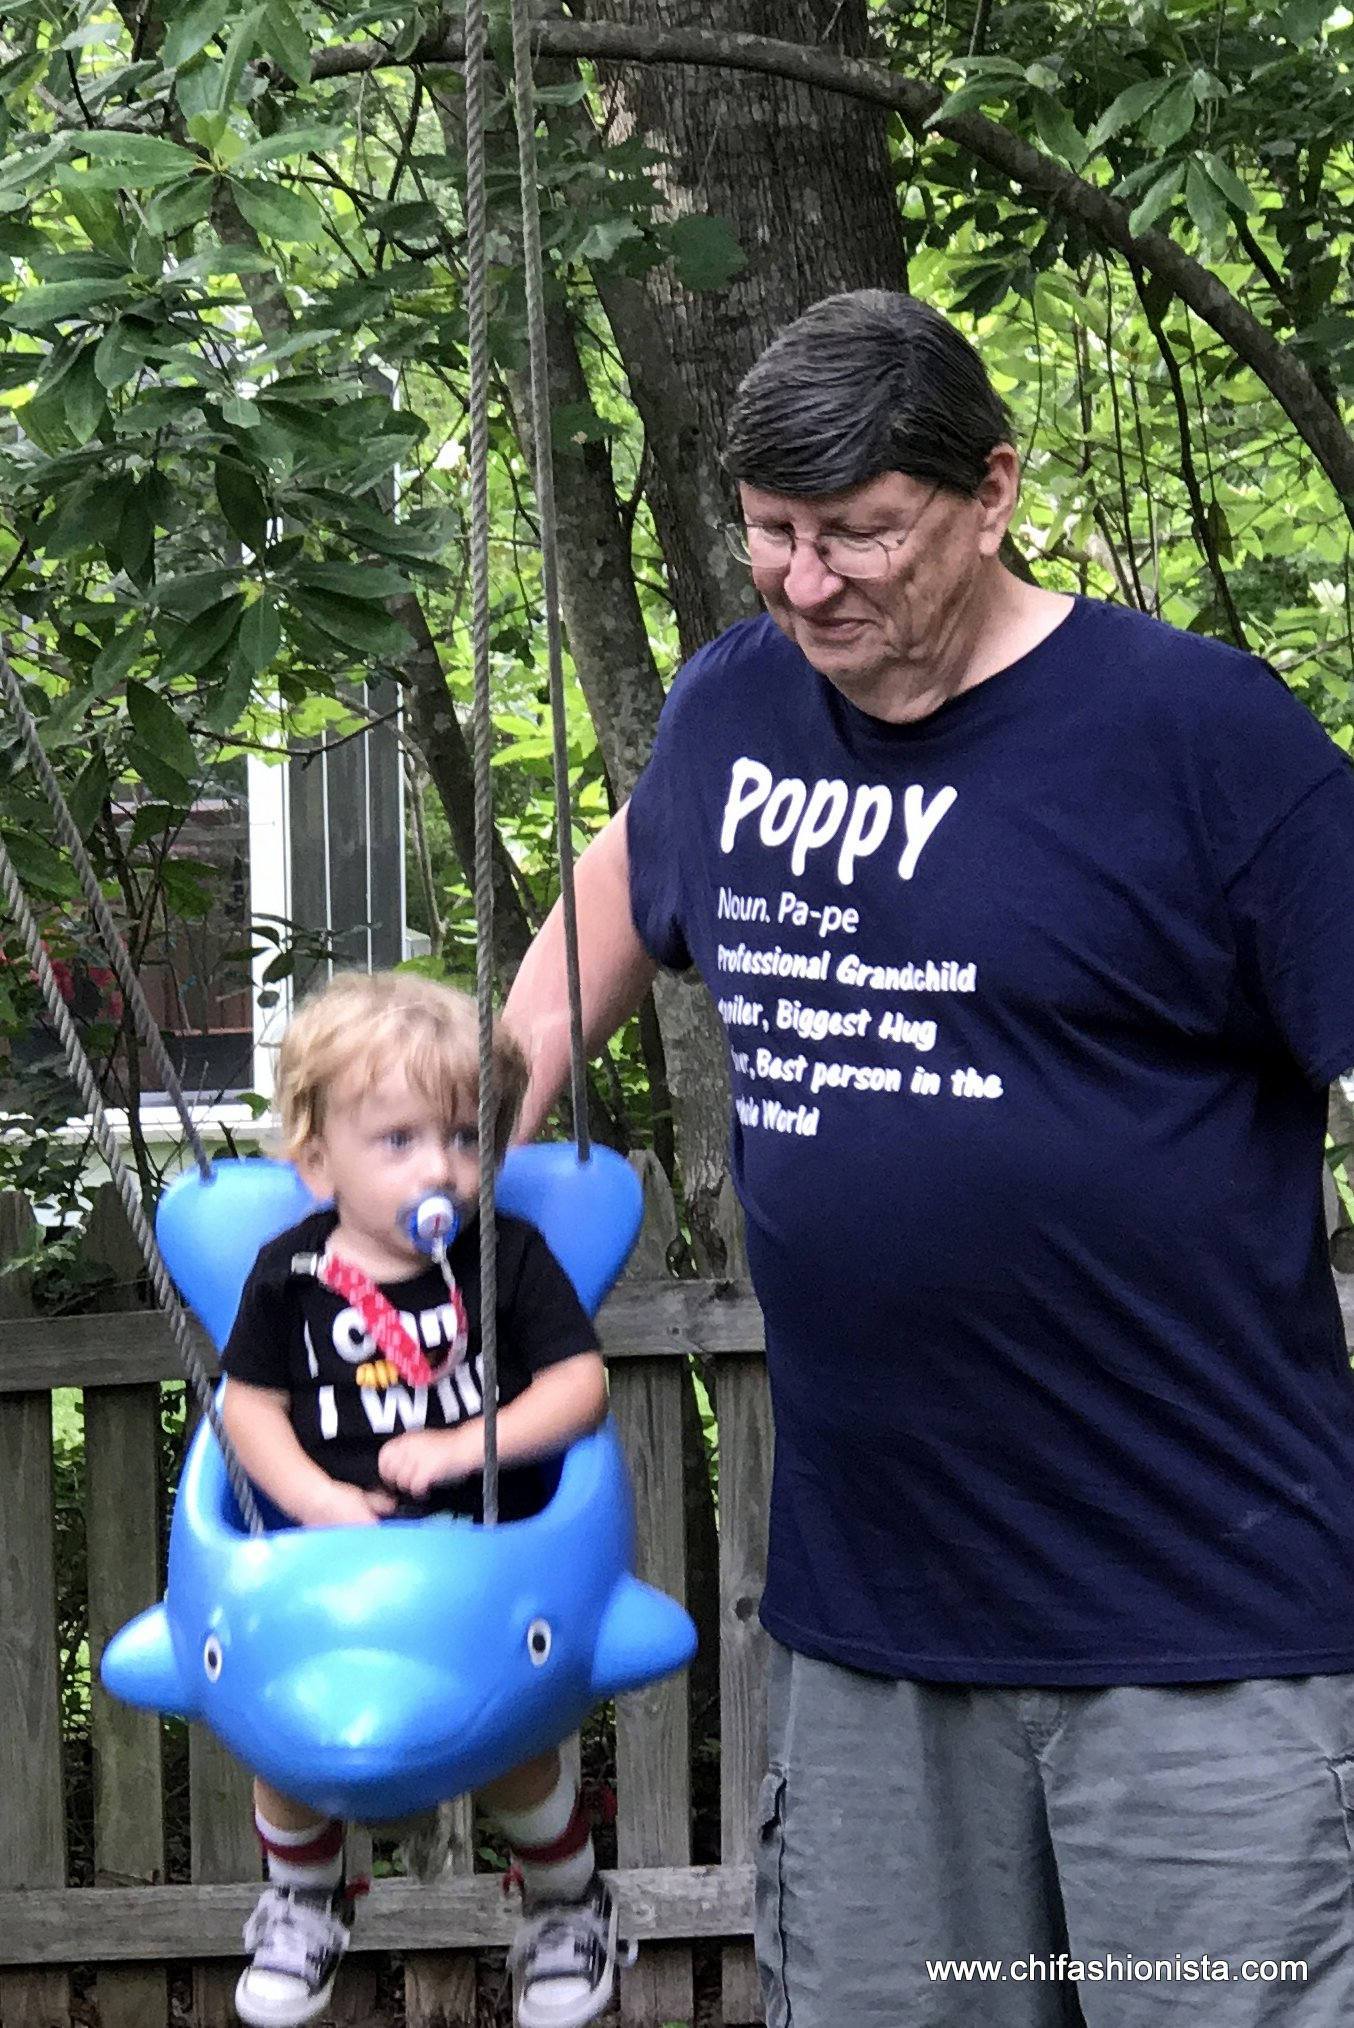 Handcrafted Children's Clothing, Clothing for Children and Parents, Poppy Shirt- Father's Day Shirt, chi-fashionista